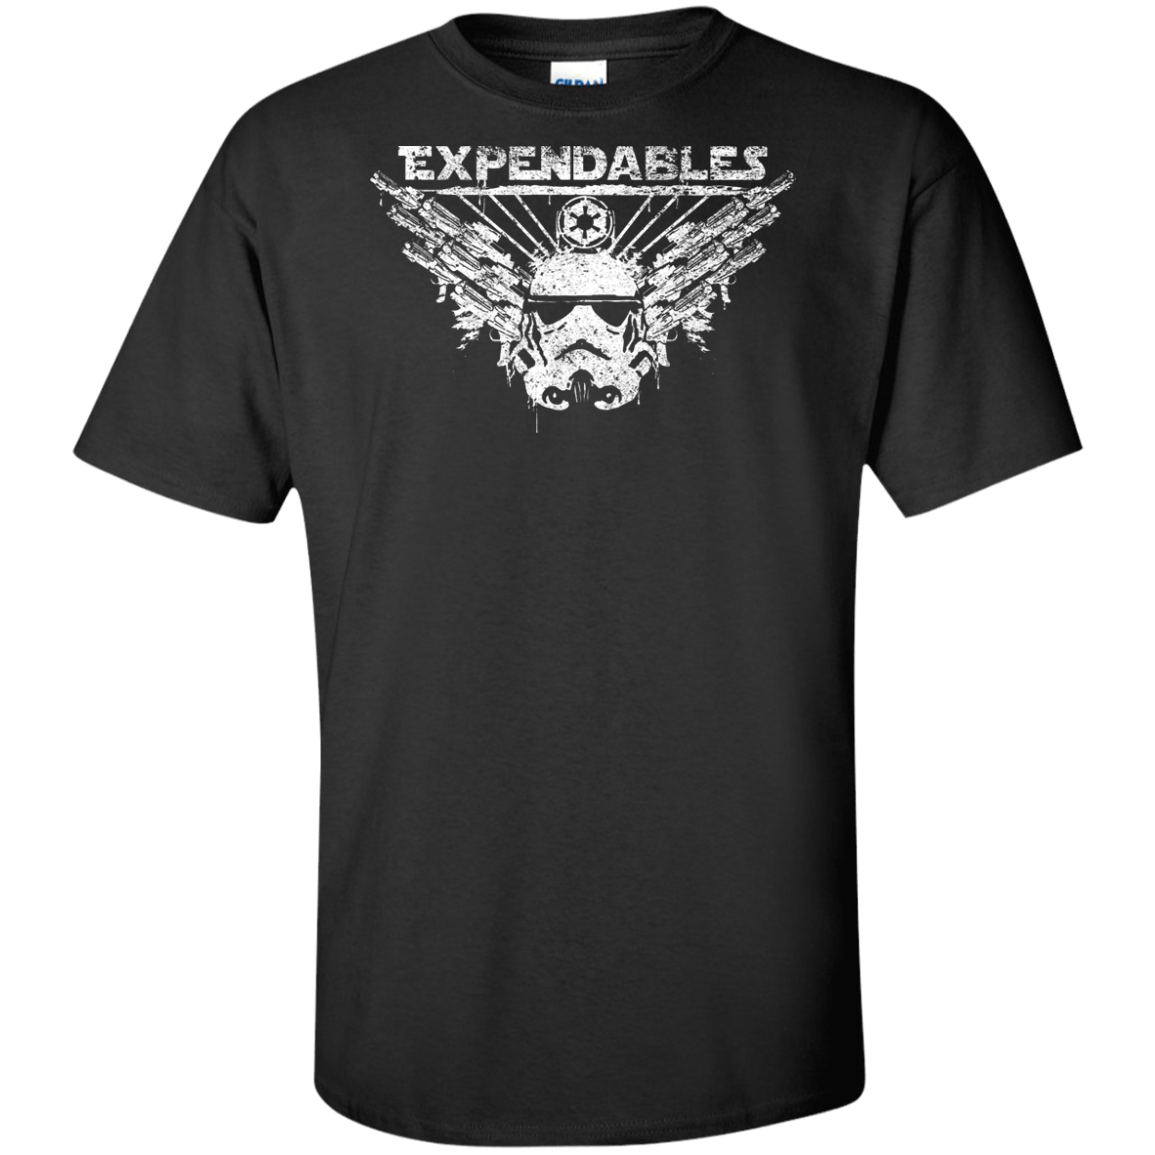 T-Shirts Black / XLT Expendable Troopers Tall T-Shirt